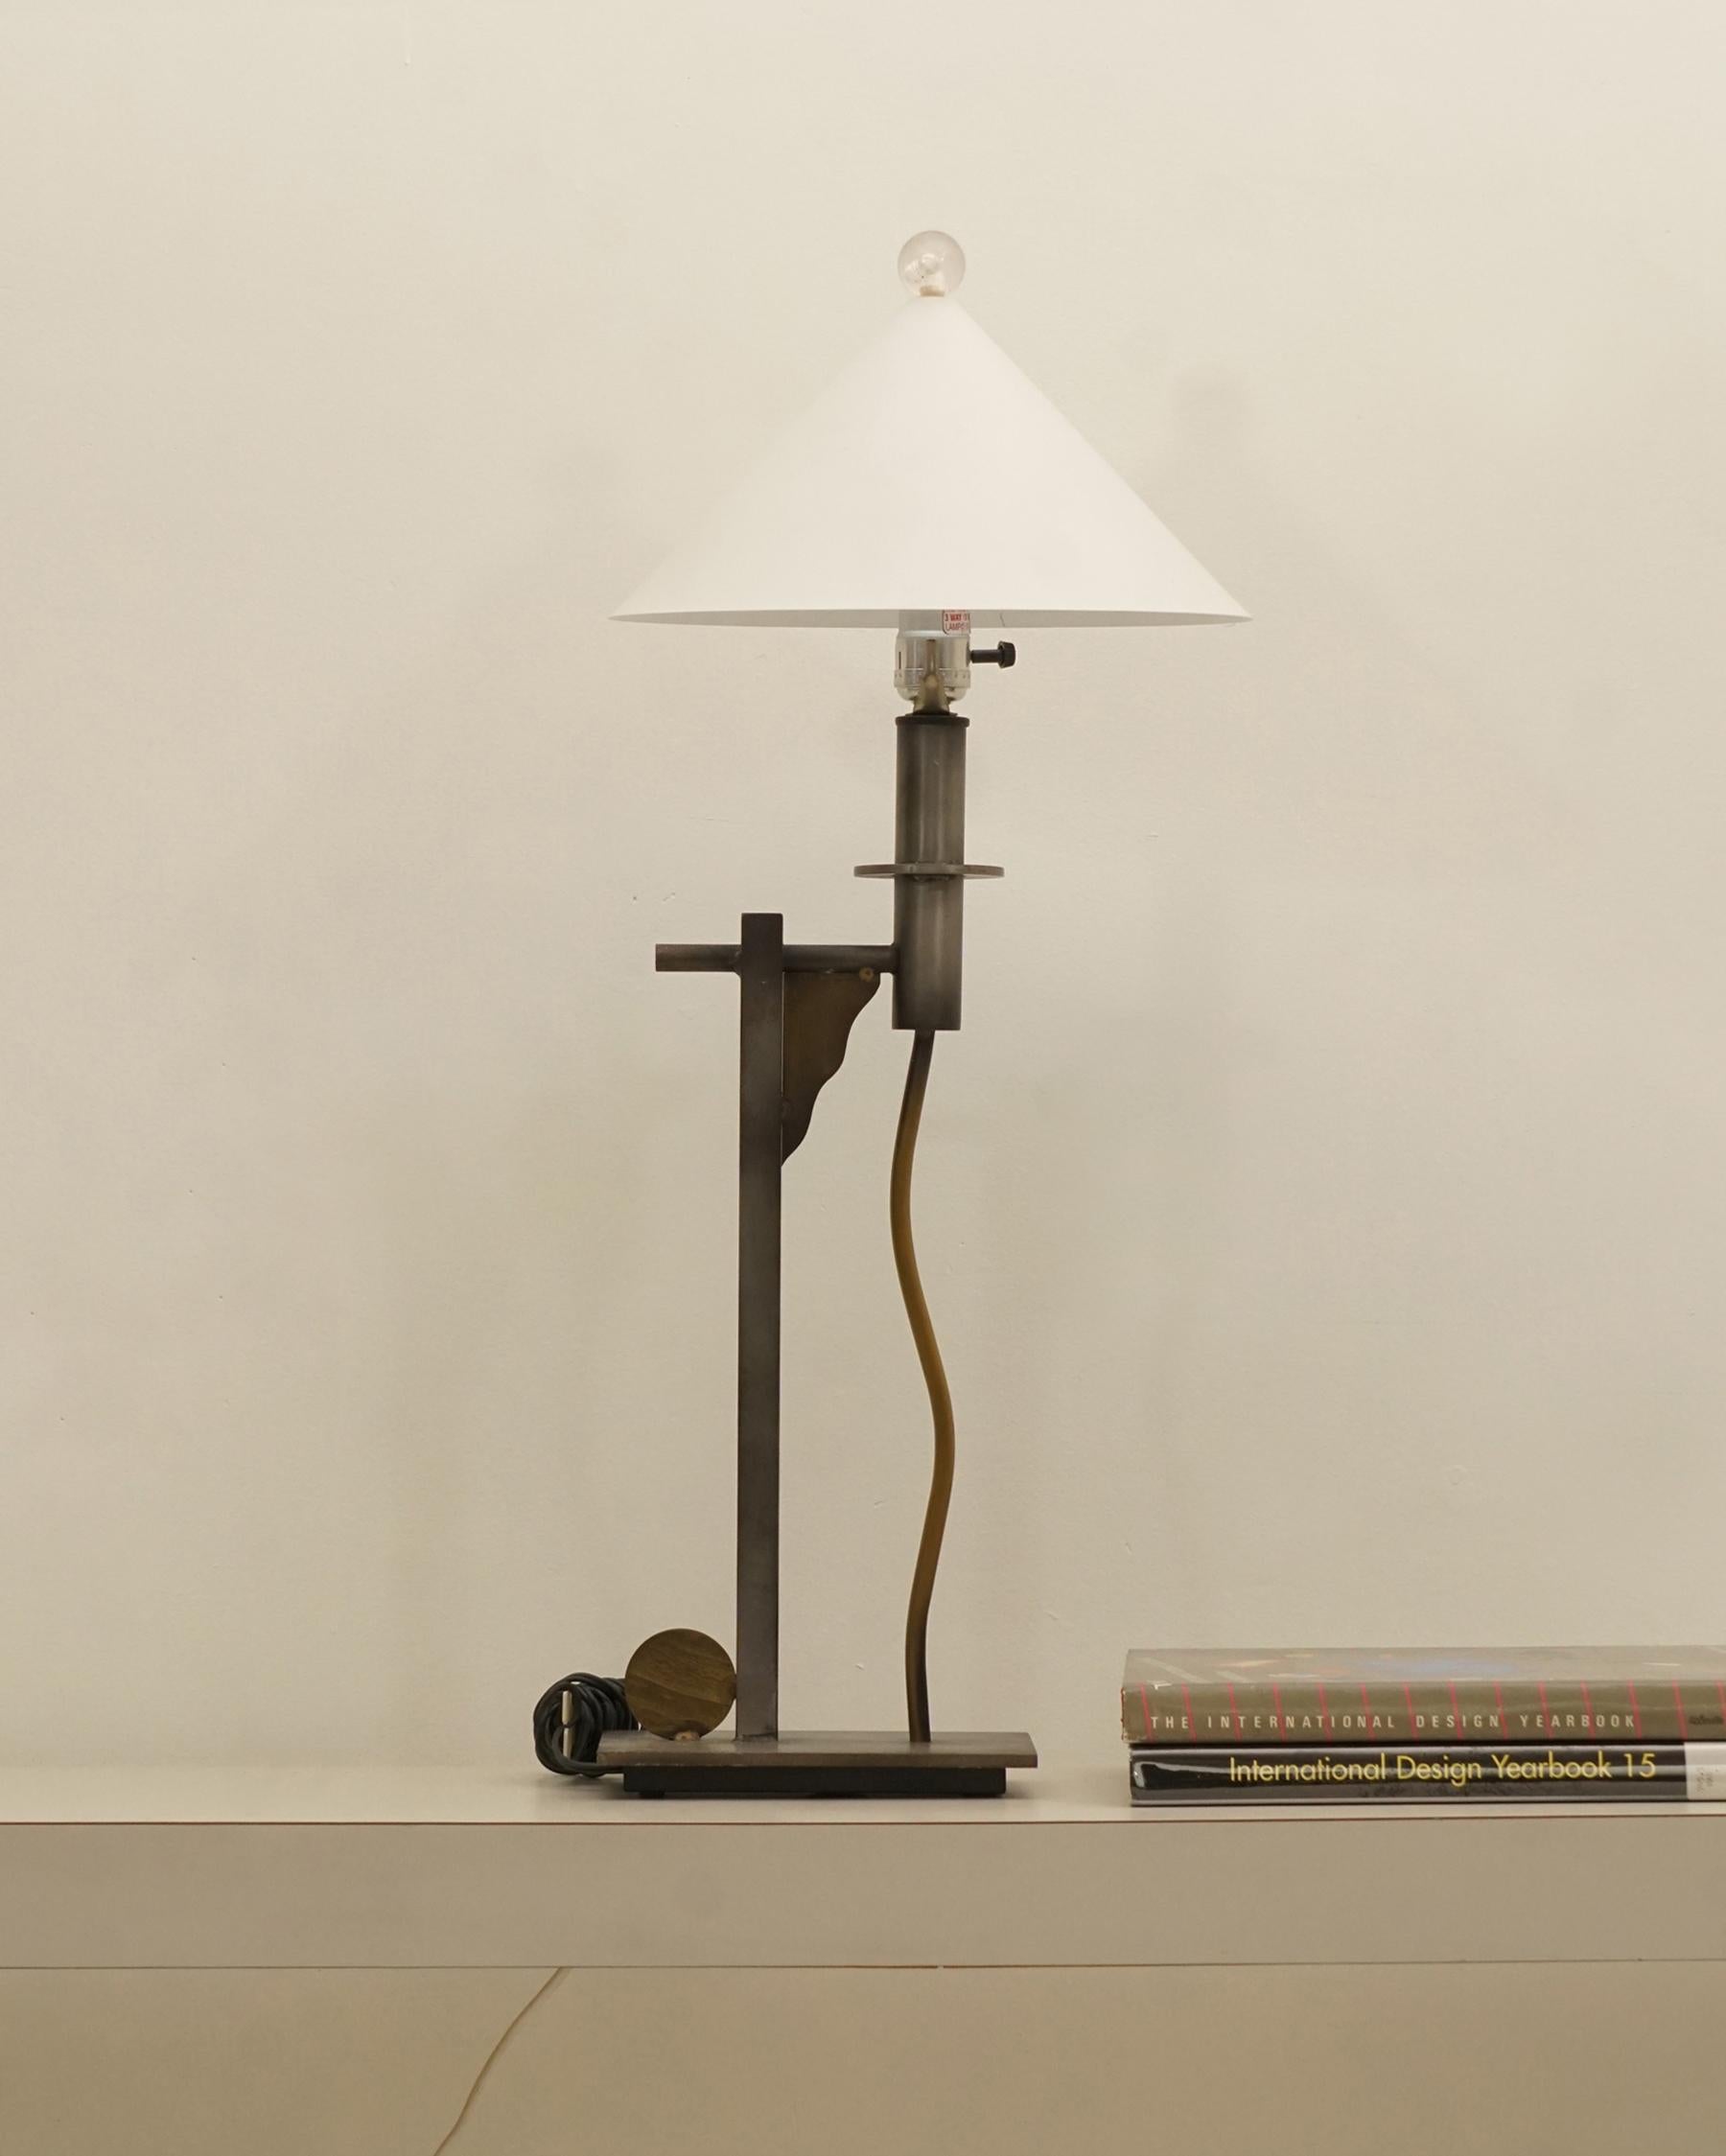 1980s Postmodern, Memphis lamp by Robert Sonneman for Geroge Kovacs. Metal conde shade base with contrasting gunmetal and brass shapes and finishes. Acrylic finial. Shade a replacement and not an original. In excellent and works well. Overall wear